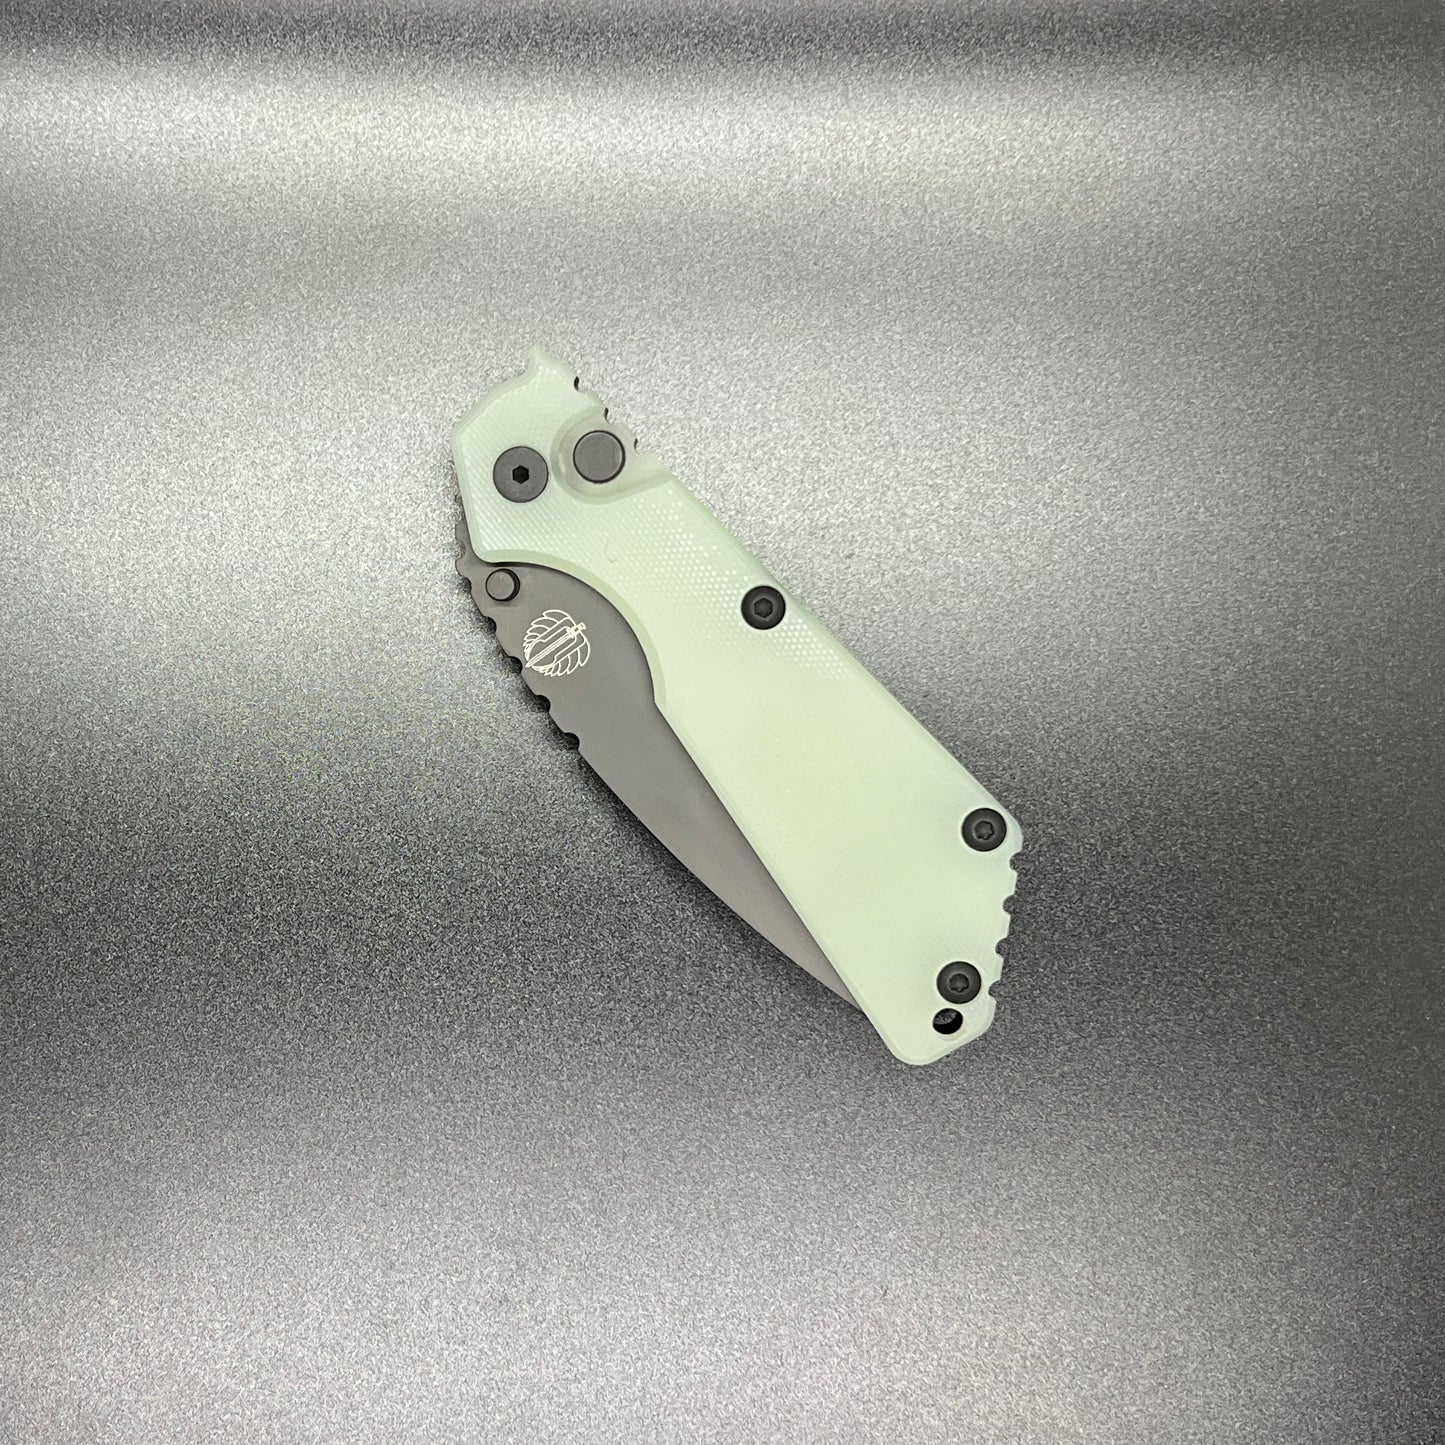 Strider + Pro-Tech Exclusive SnG Automatic